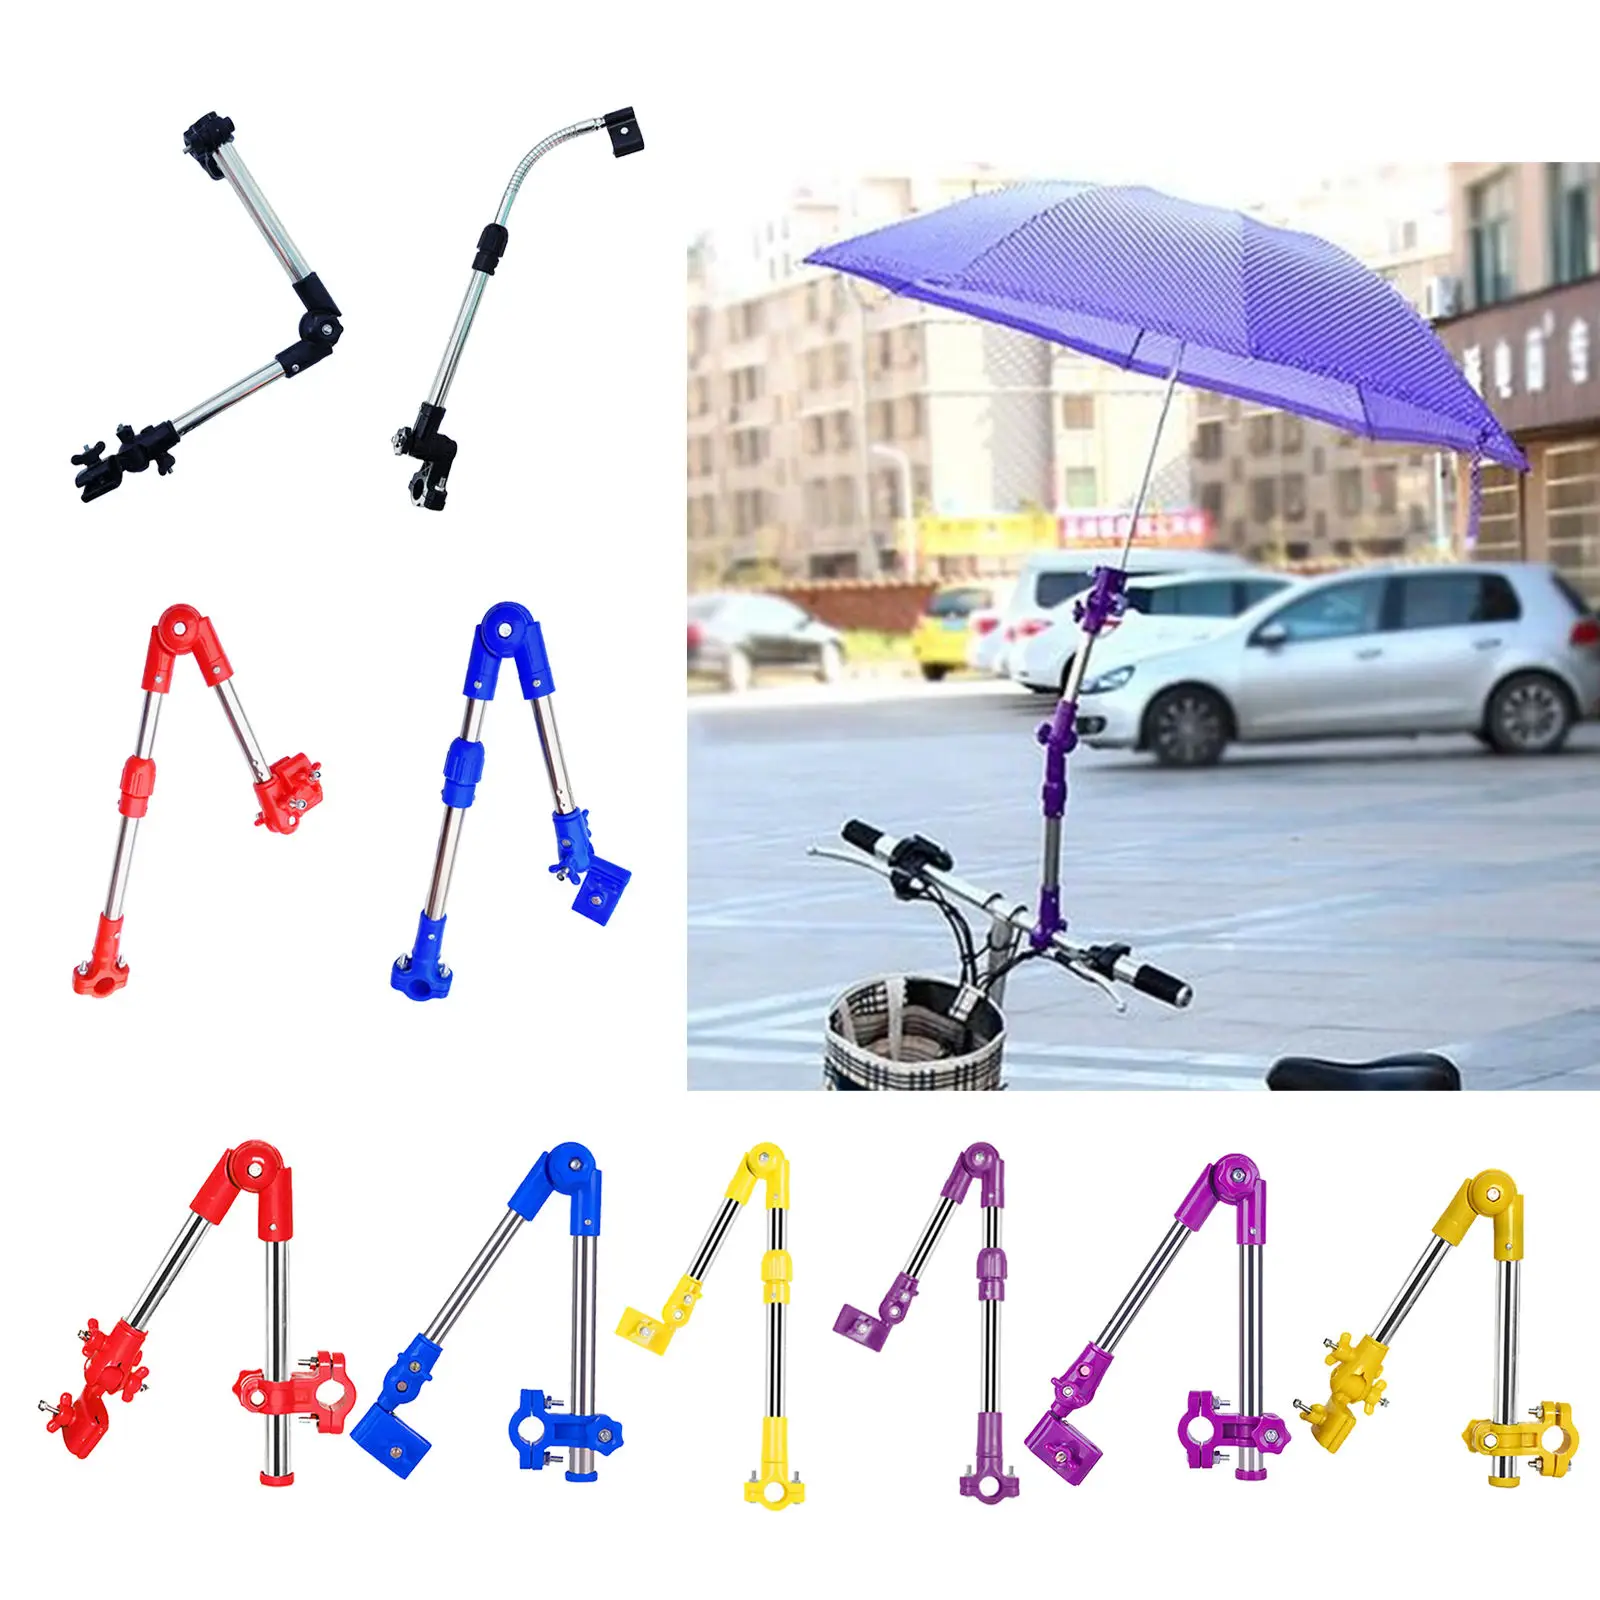 Stainless Steel Bicycle Umbrella Holder Umbrella Stand Wheelchair Stroller Folding Umbrella Easy To Install and Remove